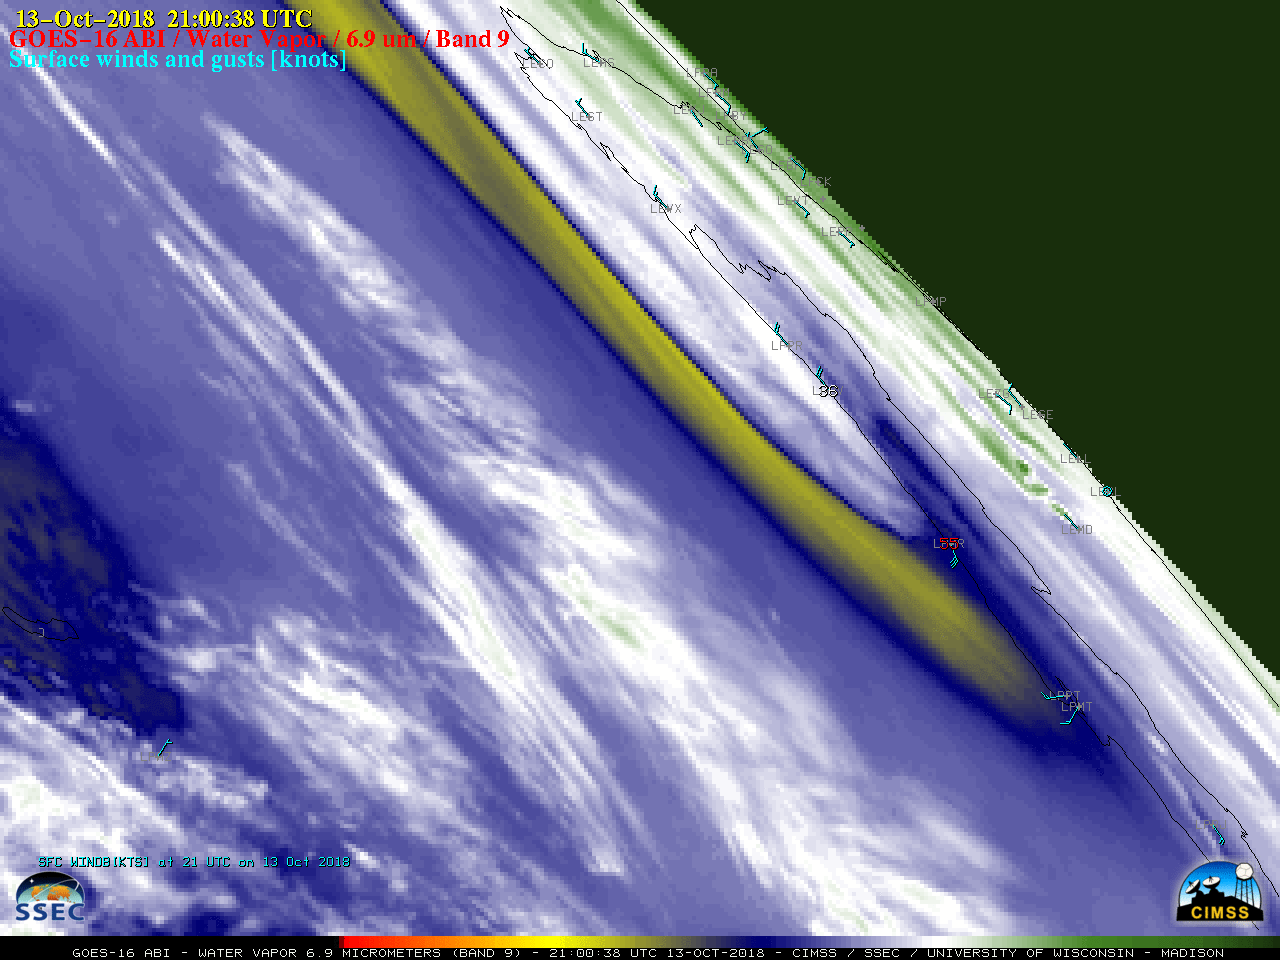 GOES-16 Mid-level Water Vapor (6.9 µm) images, with hourly plots of surface winds and gusts in knots [click to play animation | MP4]